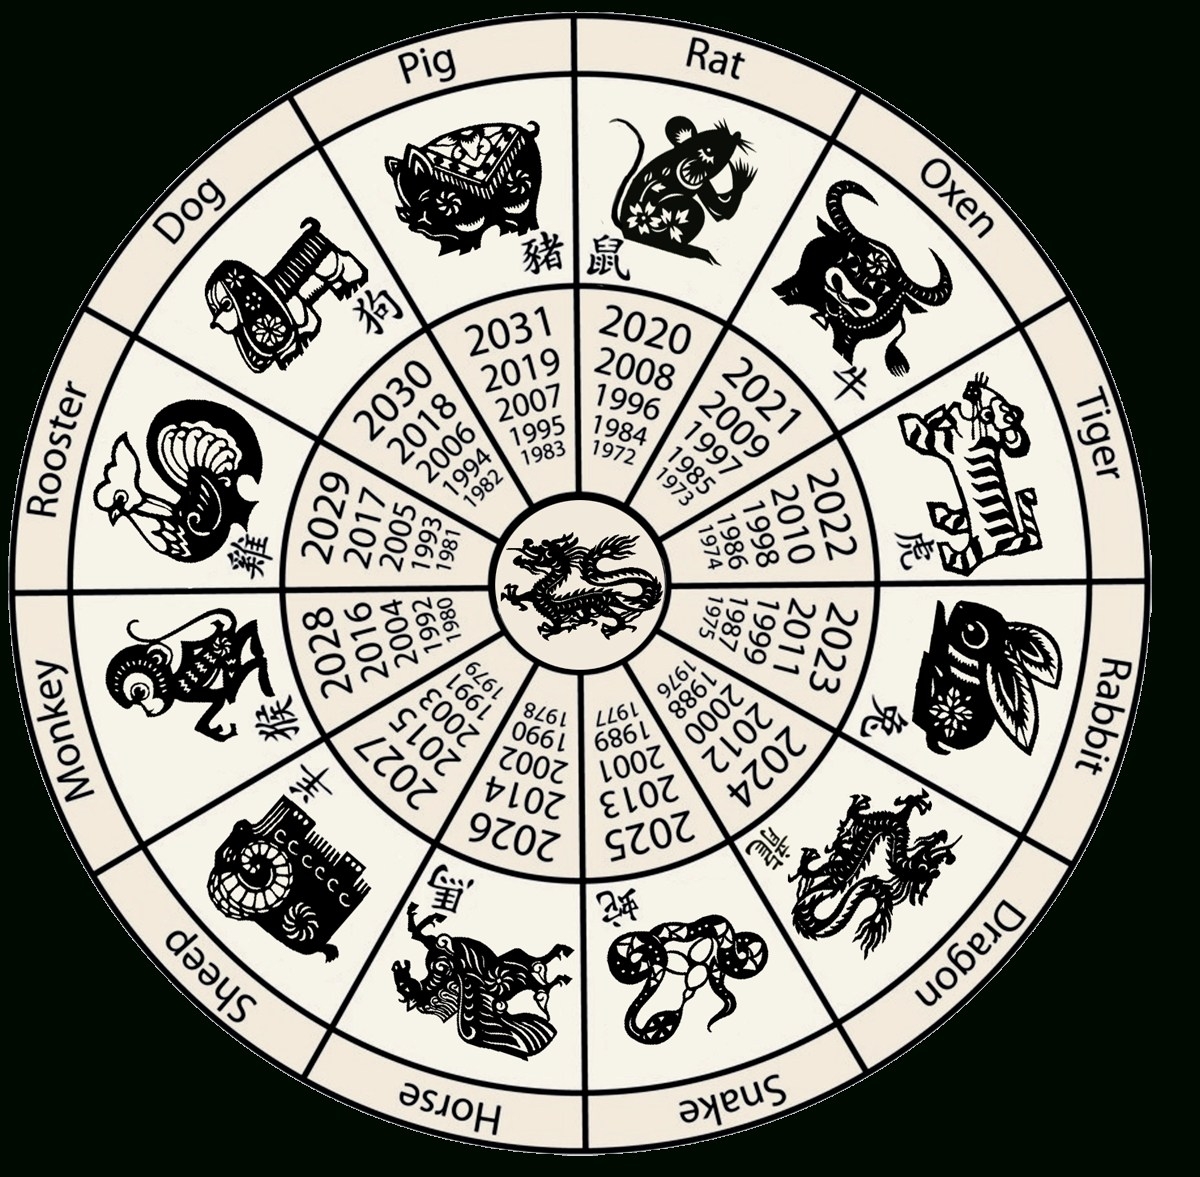 Worksheet Signs Of The Zodiac | Printable Worksheets And Persian Calendar Zodiac Signs